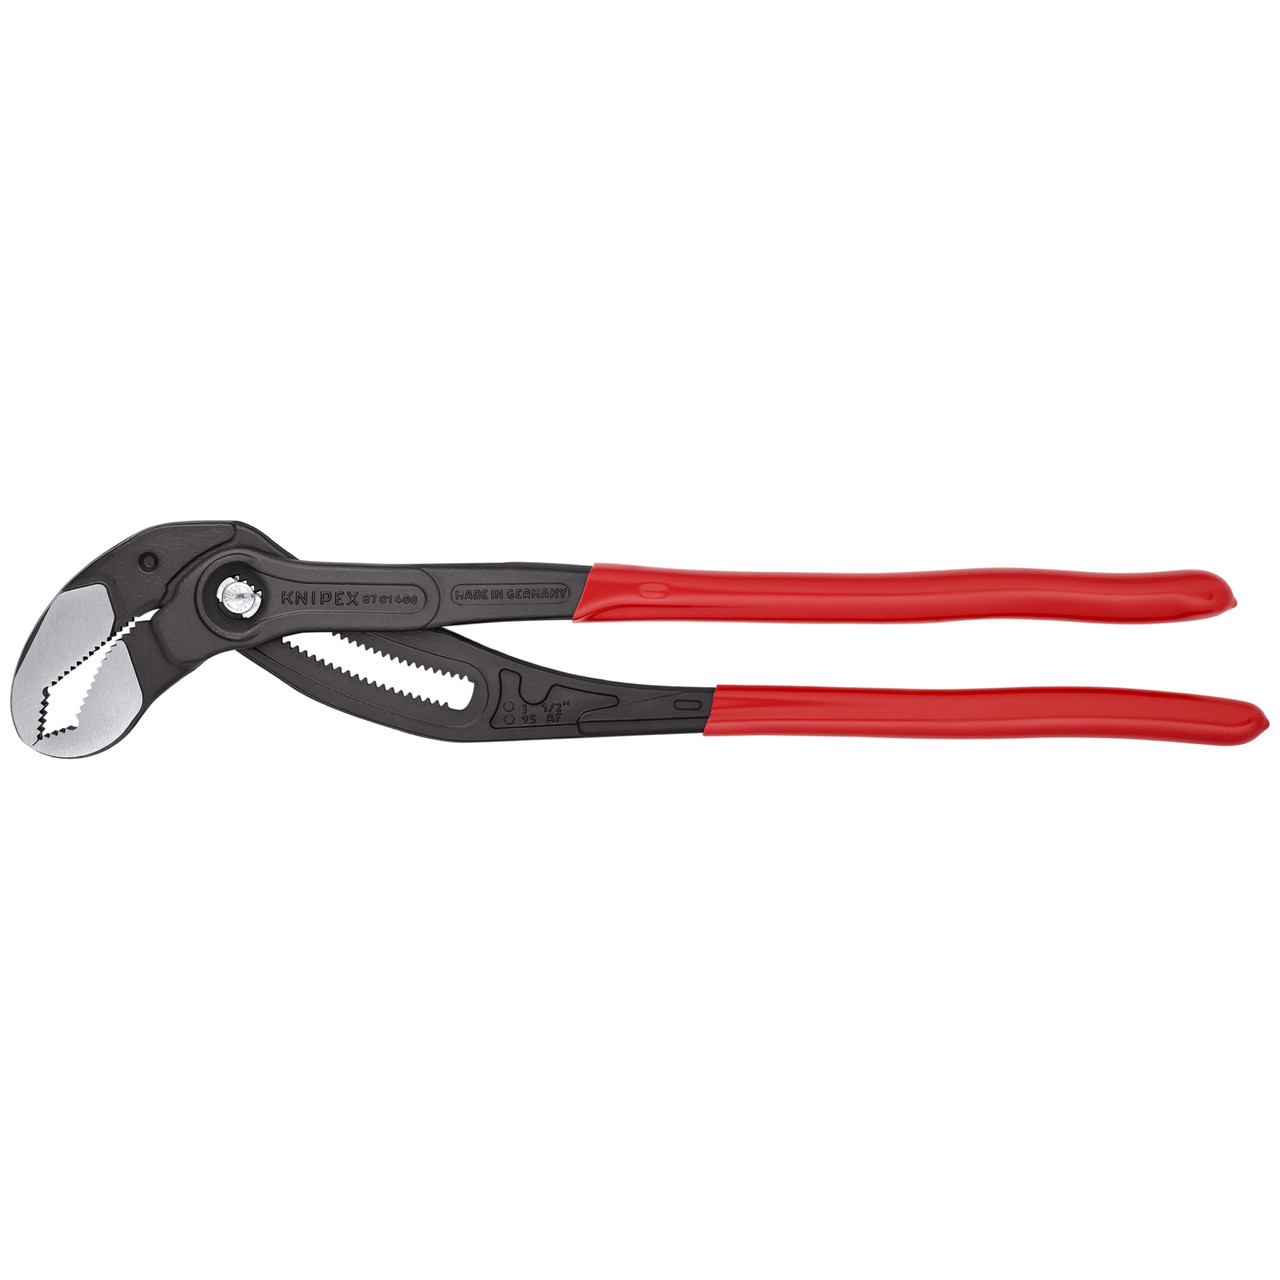 Knipex 8701 400 16" Cobra XL Pipe Wrench and Water Pump Pliers With New  Textured Grip - ChadsToolbox.com Inc